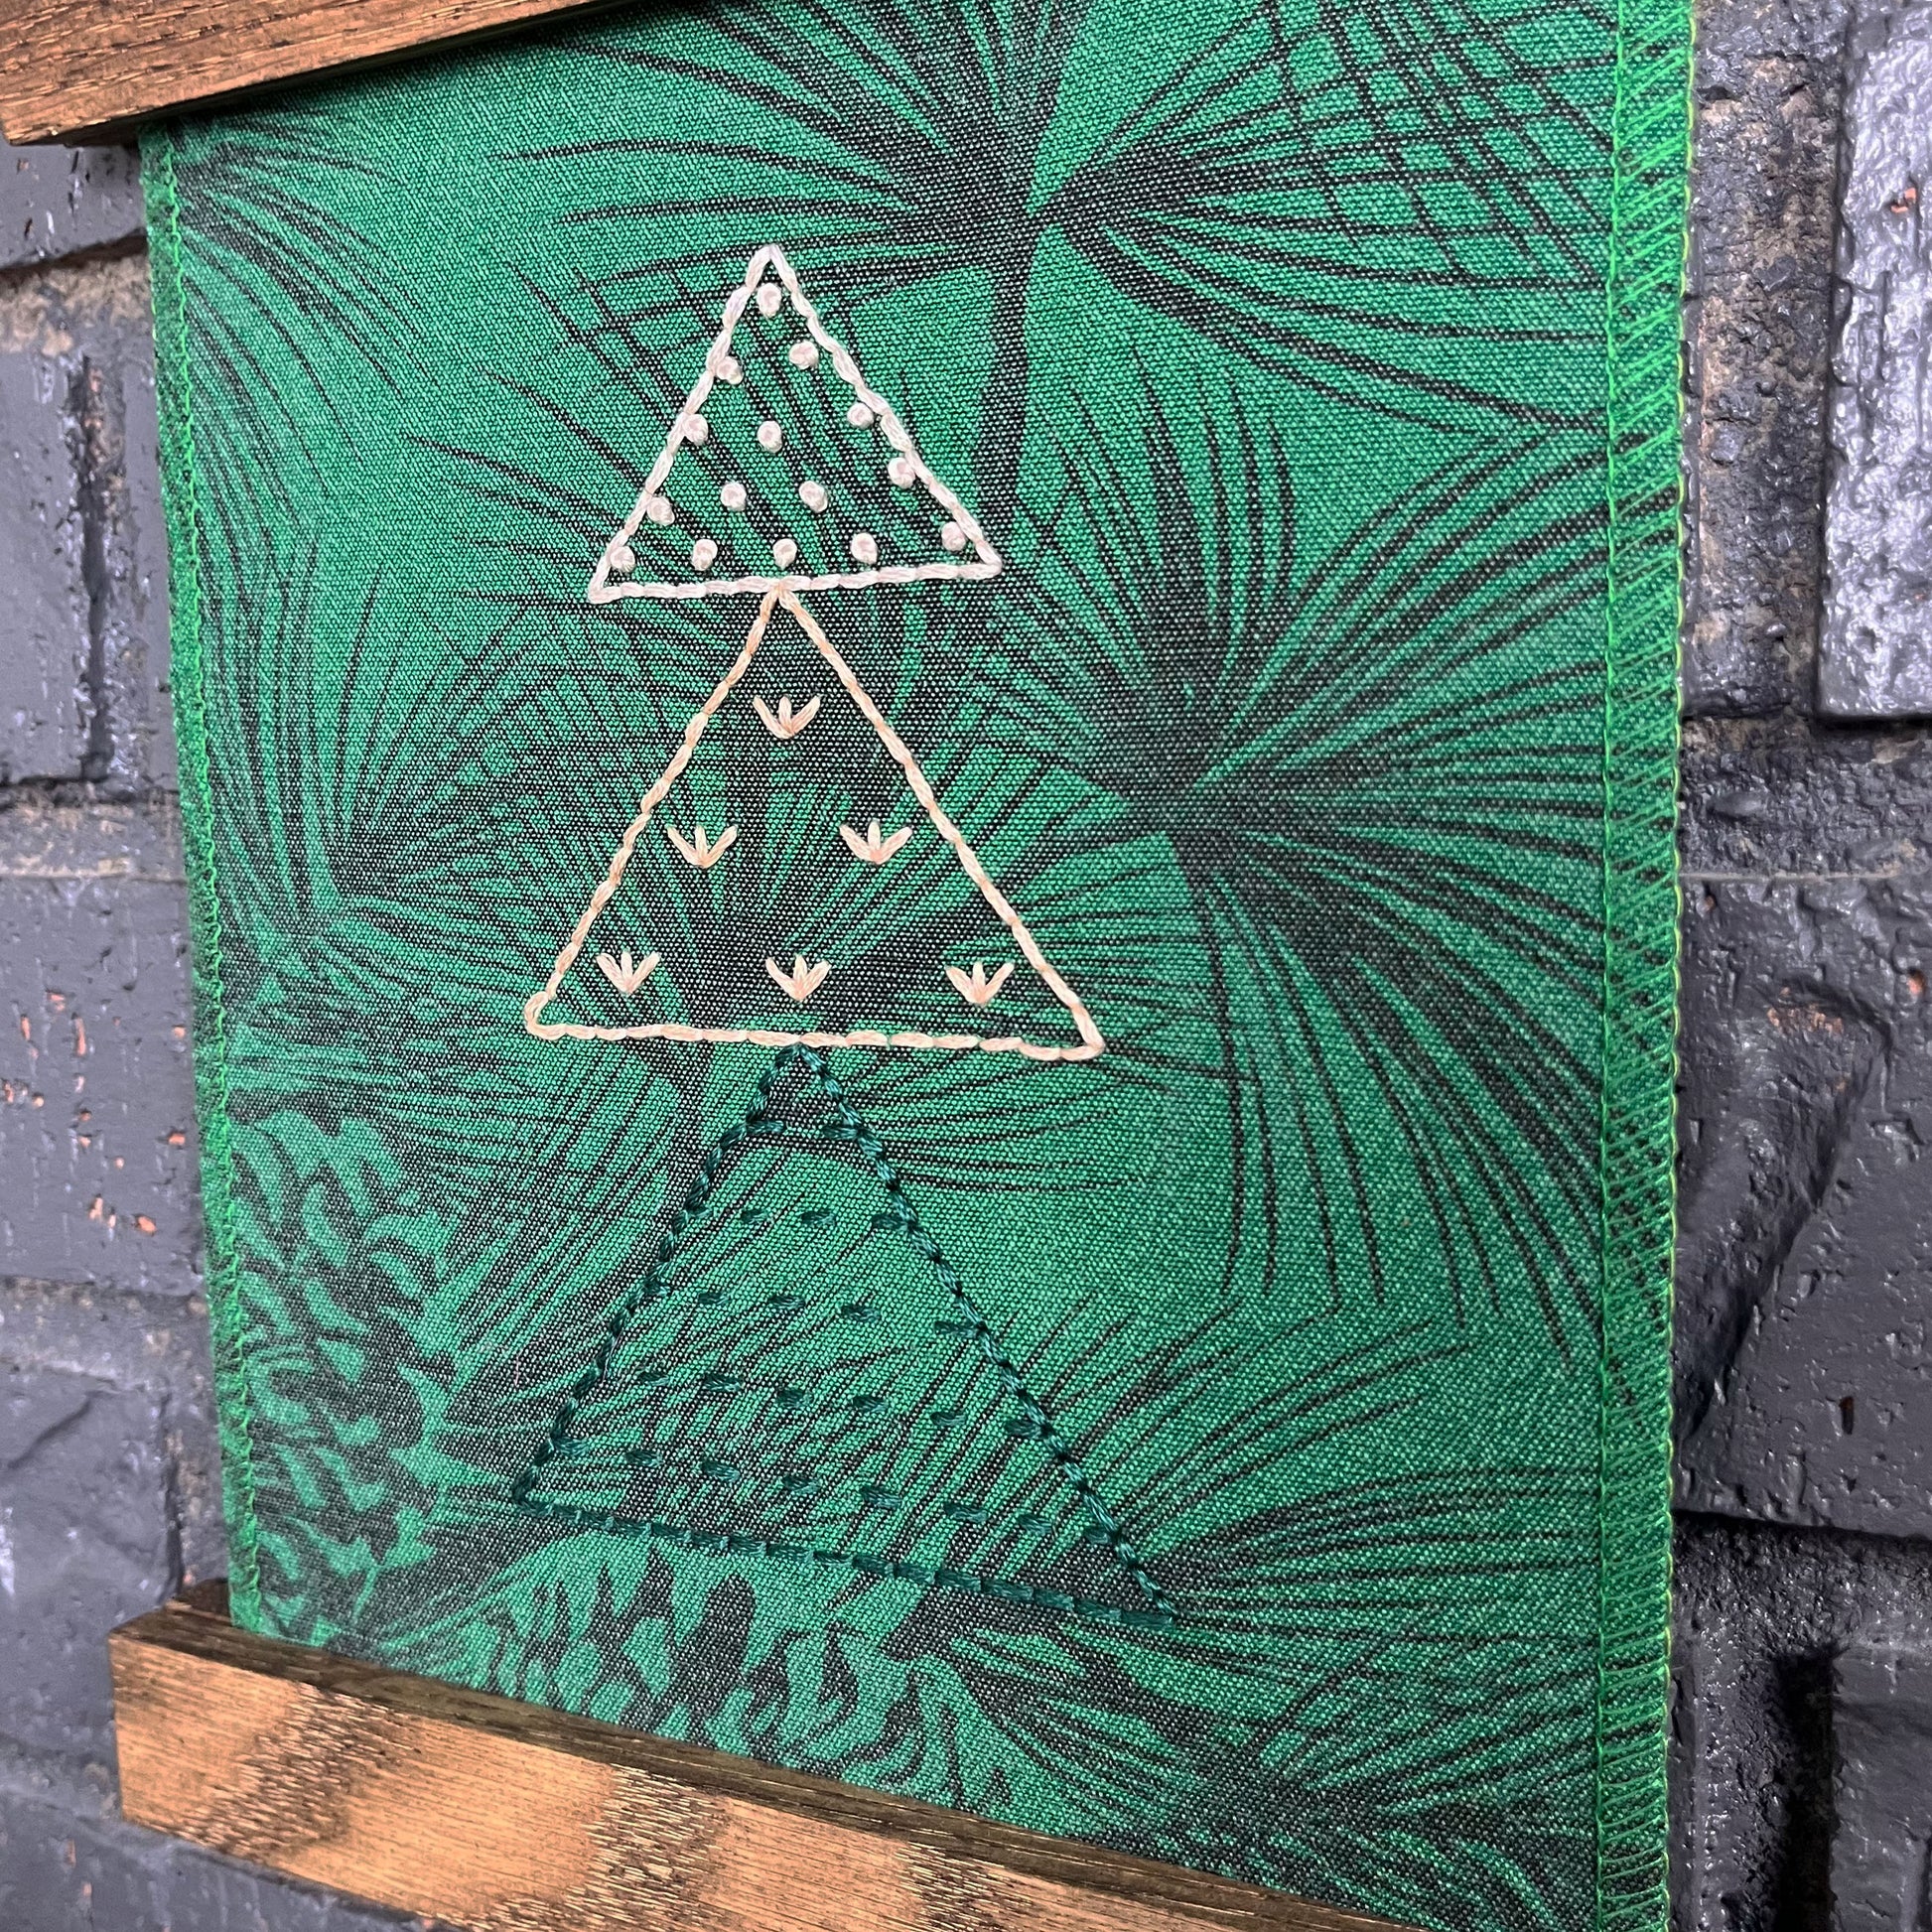 a fabric wall hanging in a magnetic wood frame, made from bright green fabric with pine branches printed on it, and stitched over with Christmas trees made from three triangles, each triangle filled with different stitches in green peach and ivory